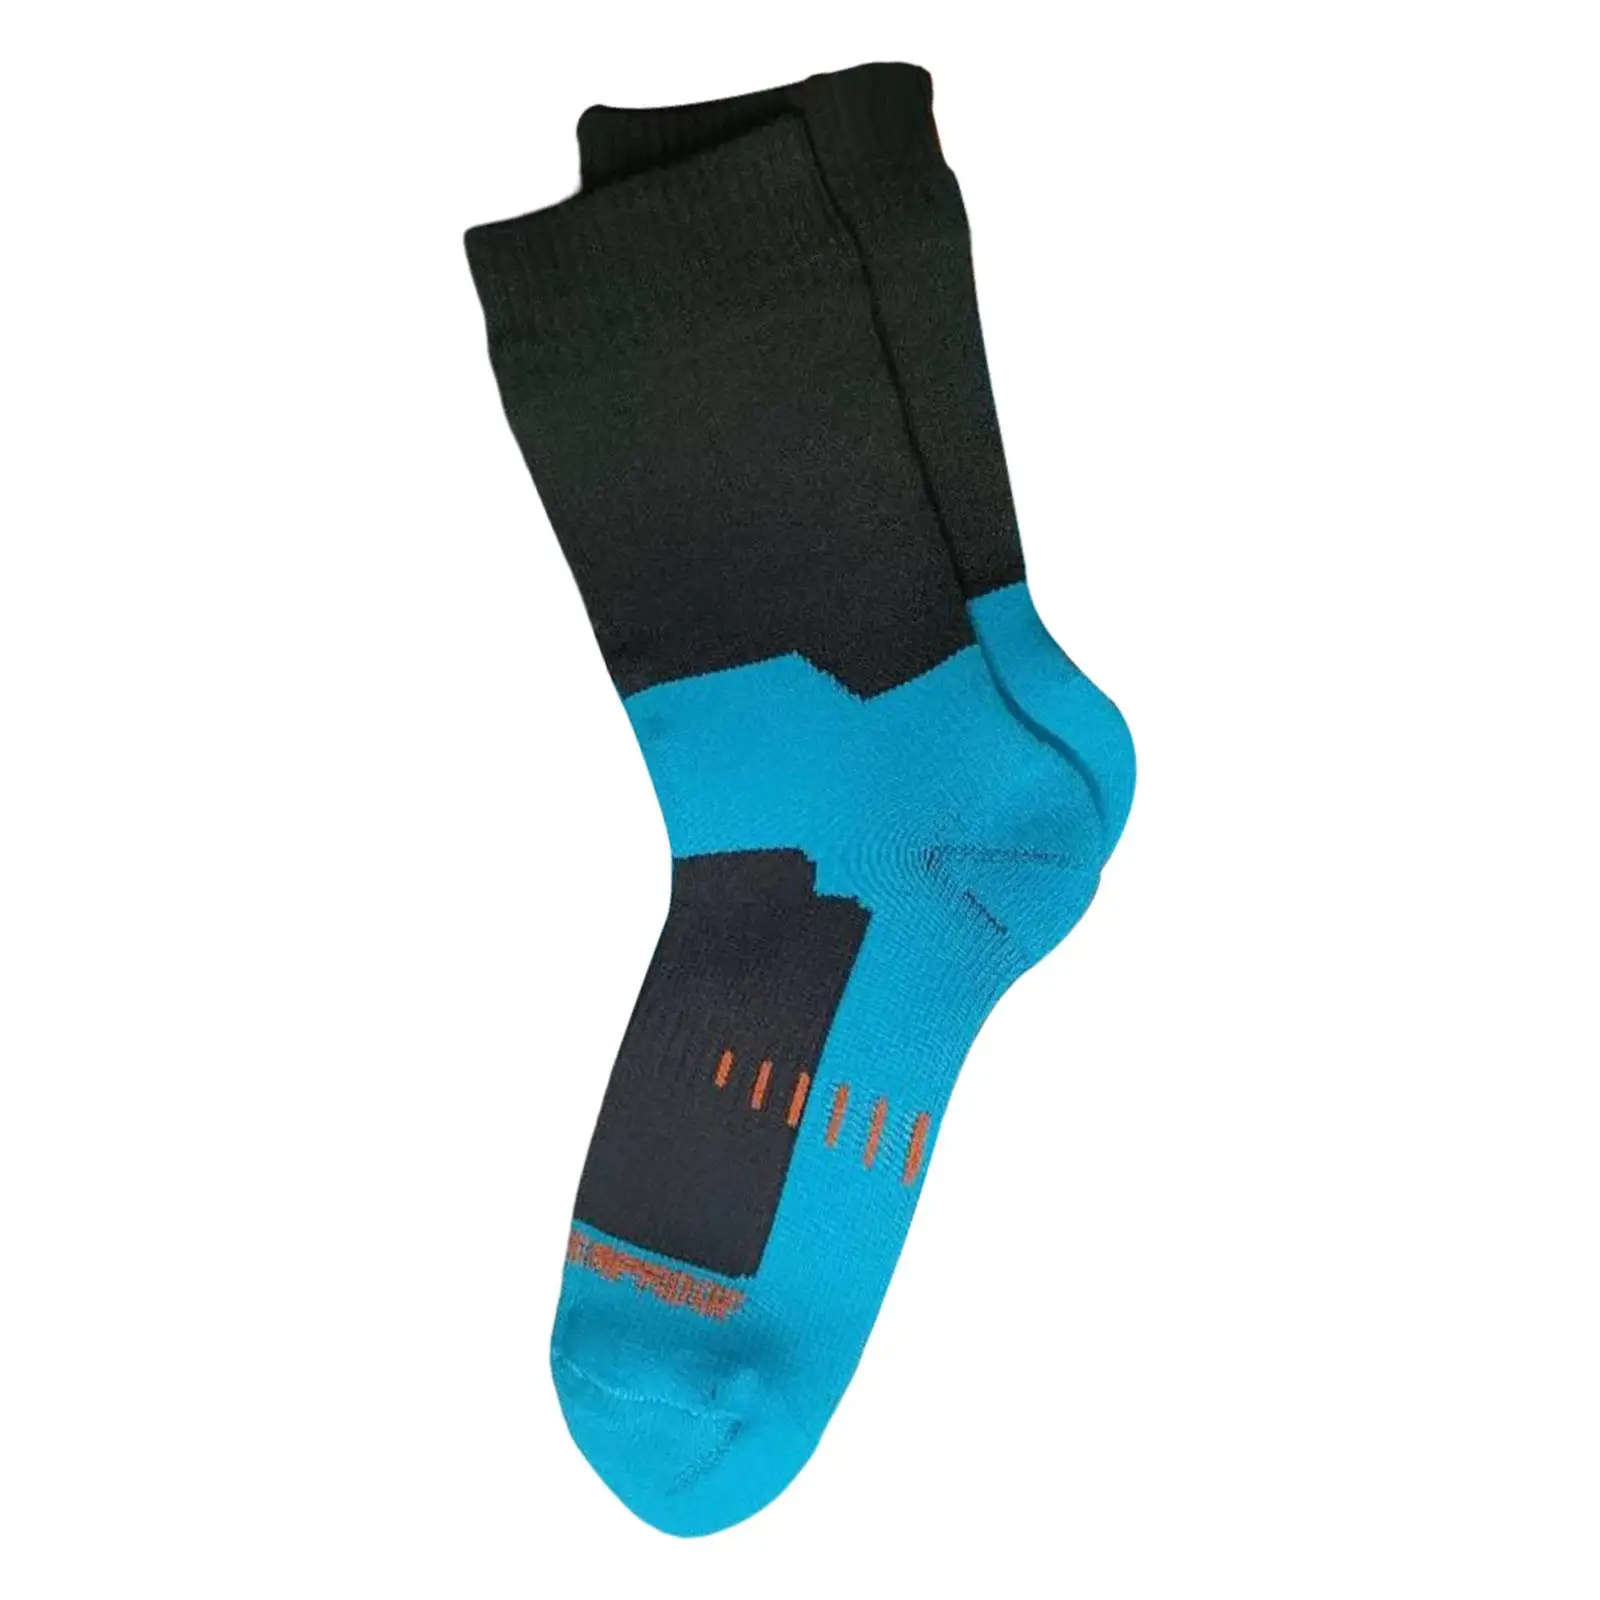 Breathable Waterproof Socks Cold Weather Warm Lightweight Mid Length Soft 1 Pair Hiking Socking for Skiing Wading Walking Unisex